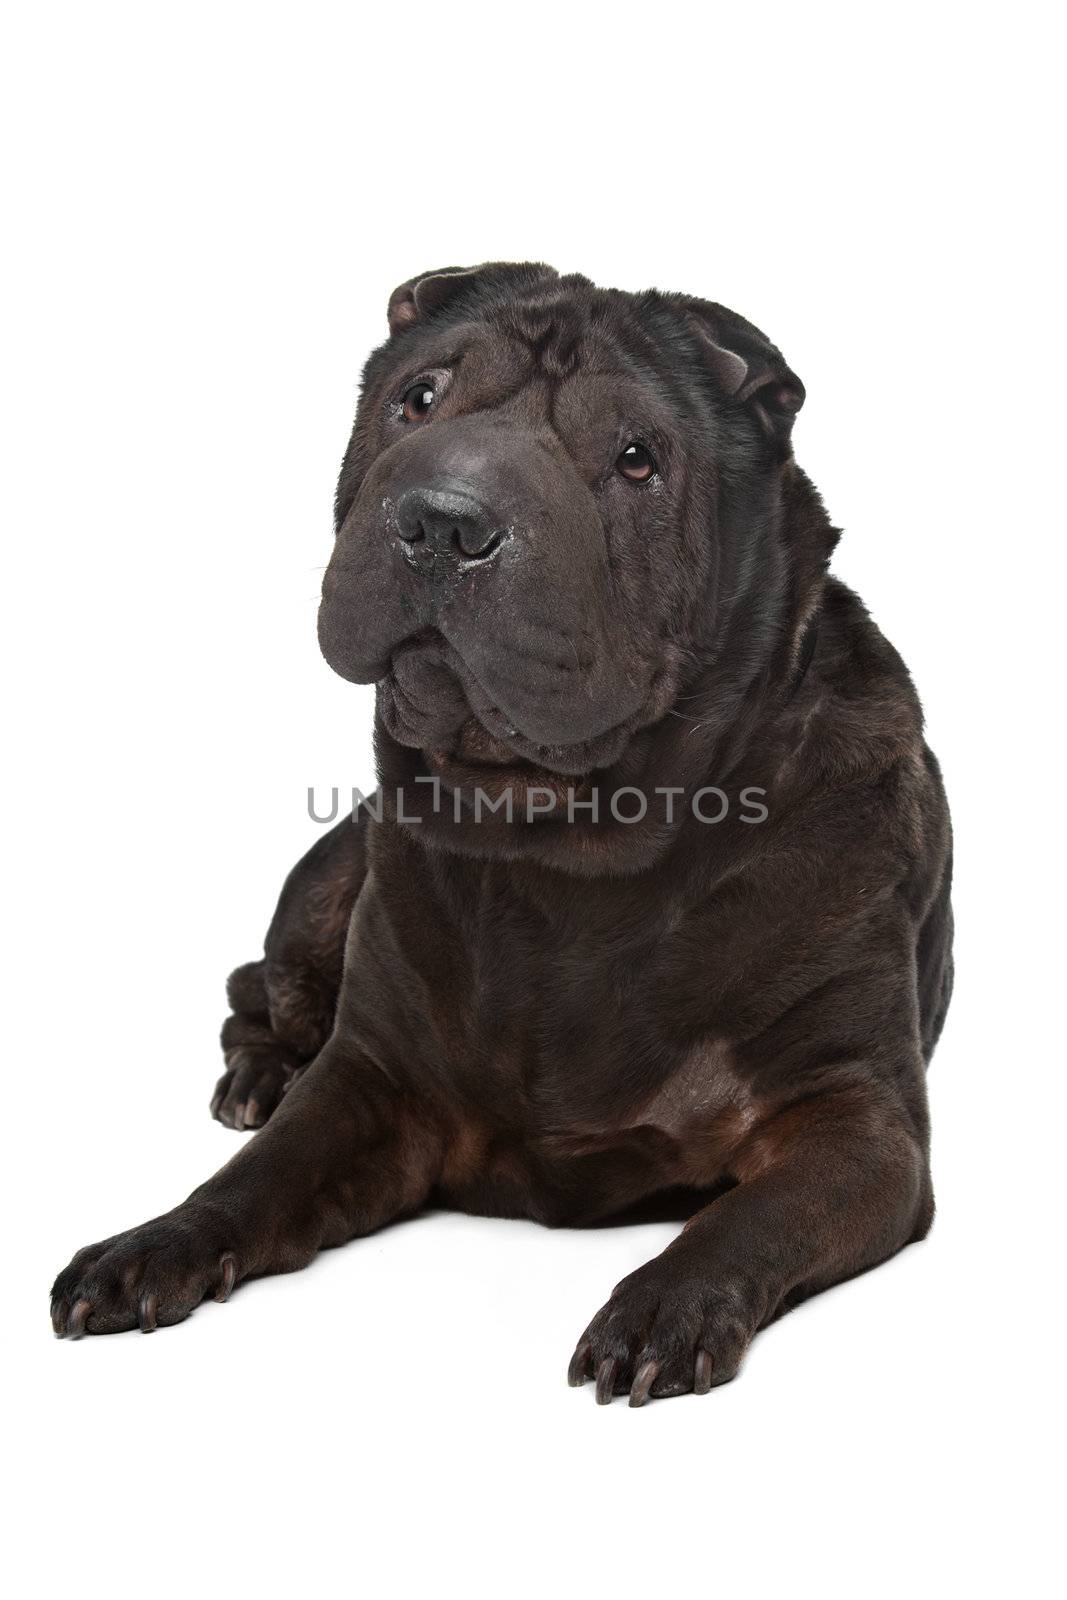 Shar-Pei in front of a white background